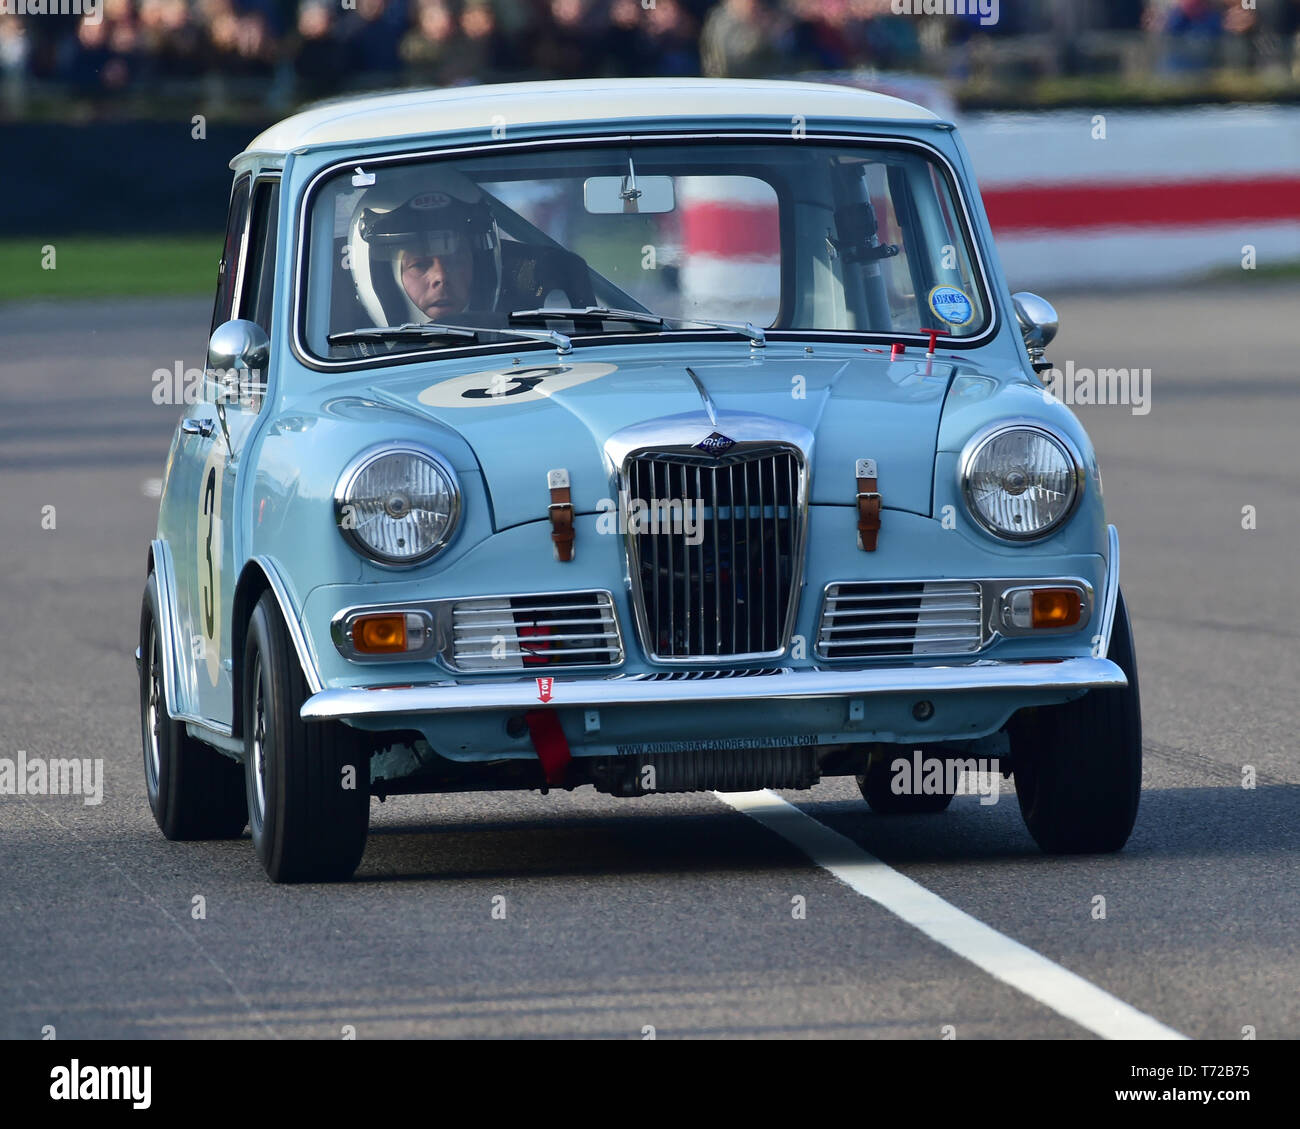 Phil Anning, Riley Elf, Betty Richmond Trophy Heat 2, Mini saloons, 77th Members Meeting, Goodwood, West Sussex, England, April 2019, Autosport, cars, Stock Photo